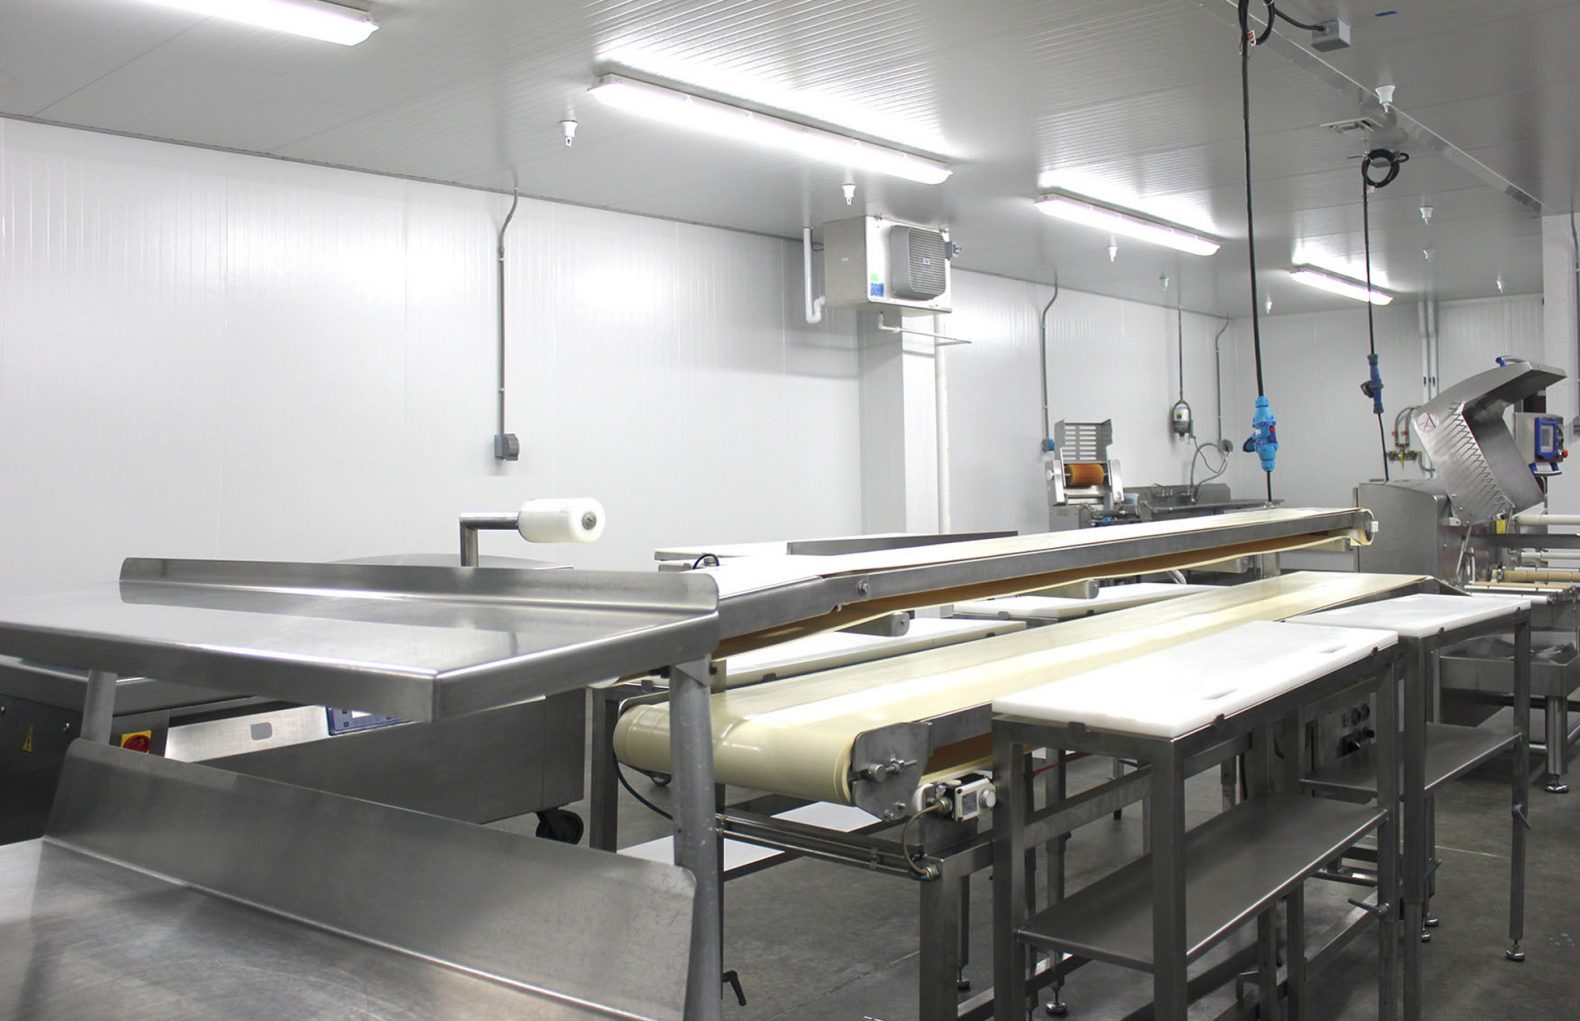 Seaborn Food Processing hall +8°c temperature controlled food preparation